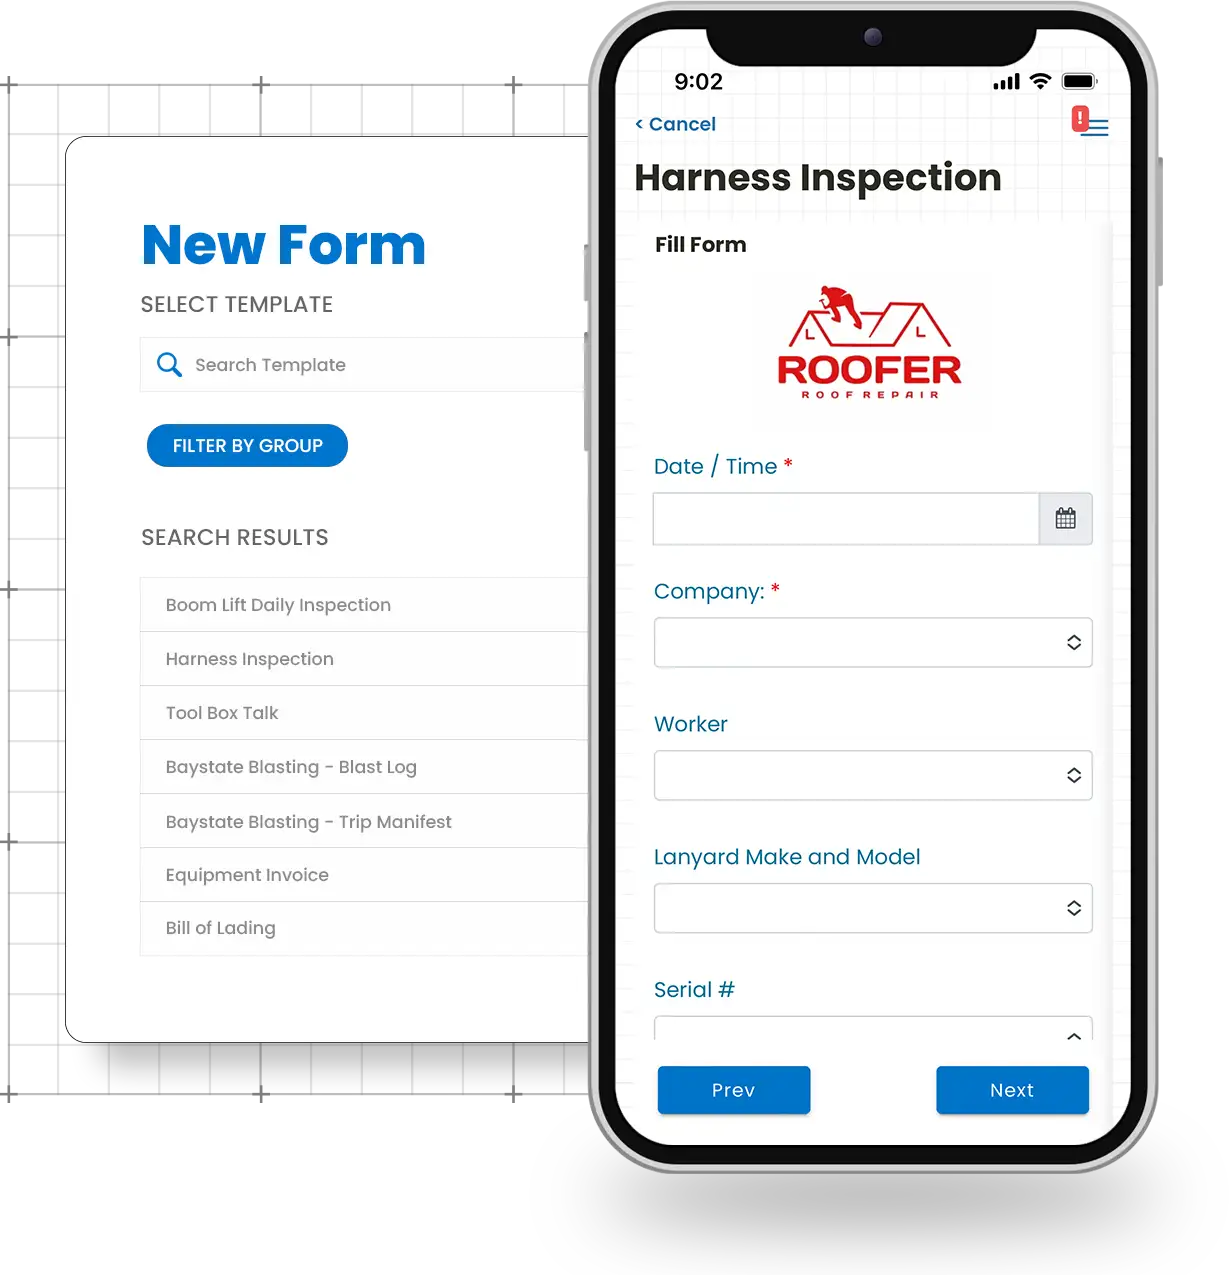 Showing the Form Builder feature in the mobile app